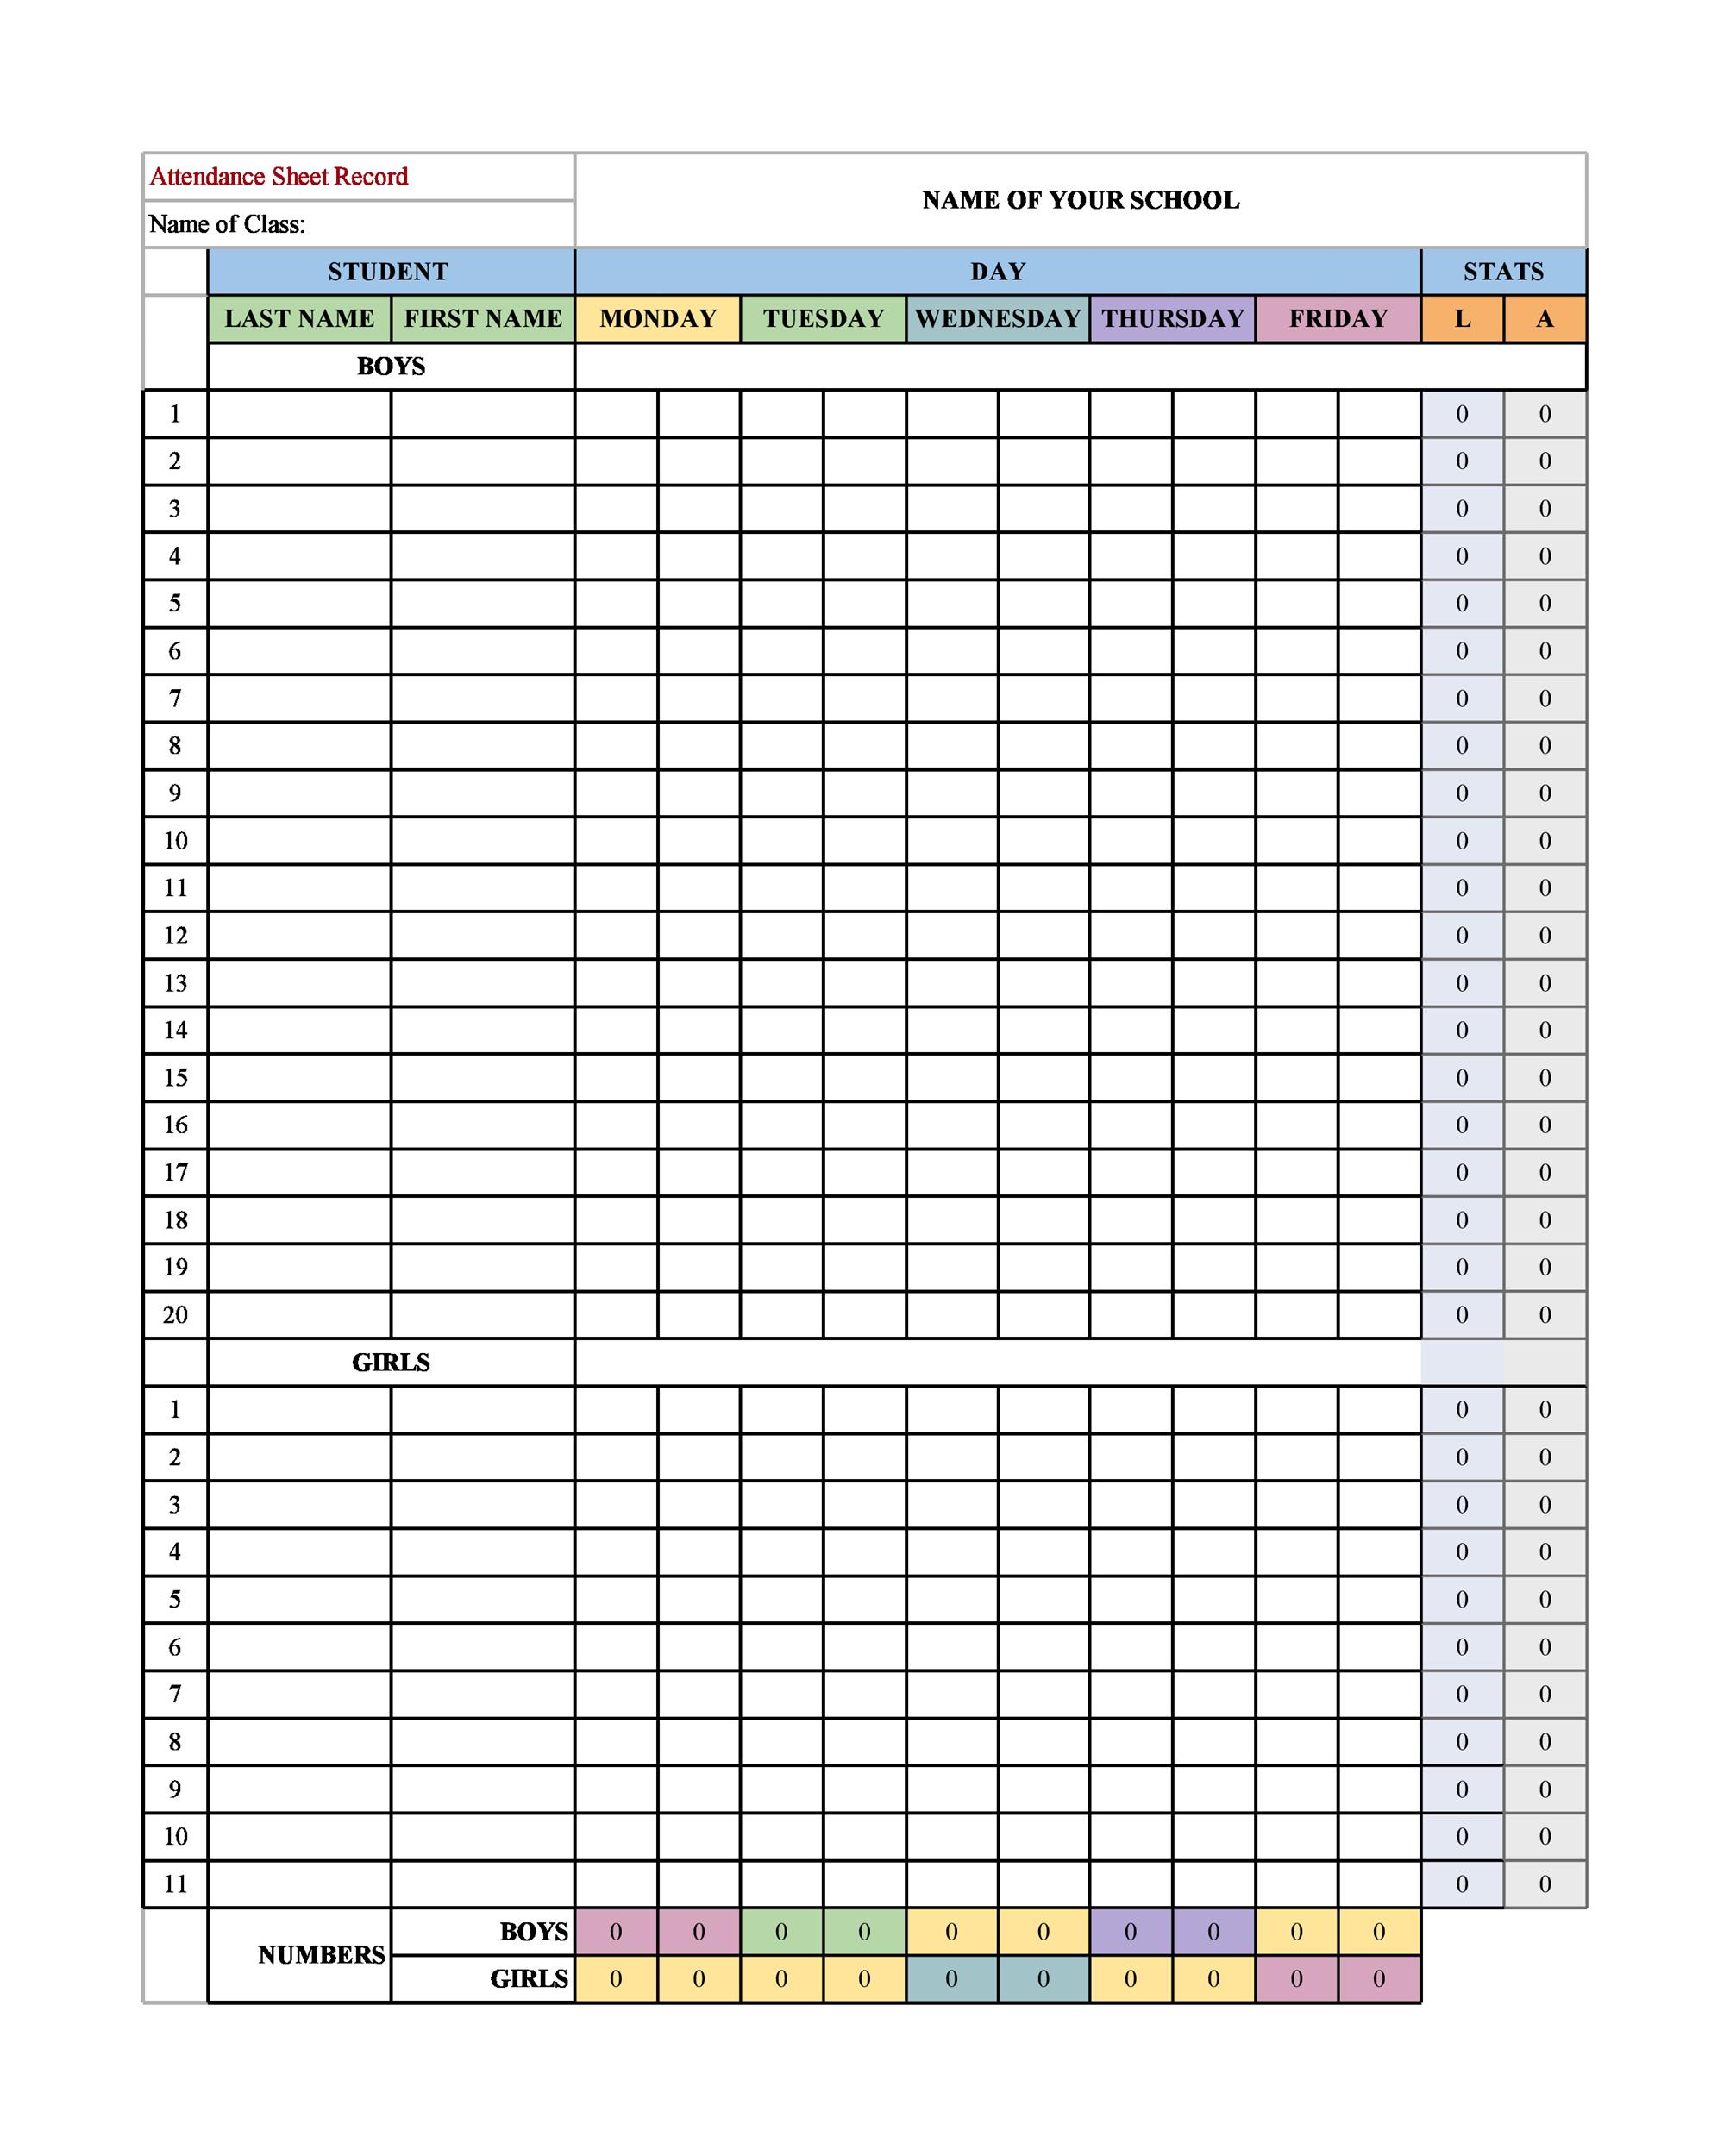 how do i make an attendance sheet in excel